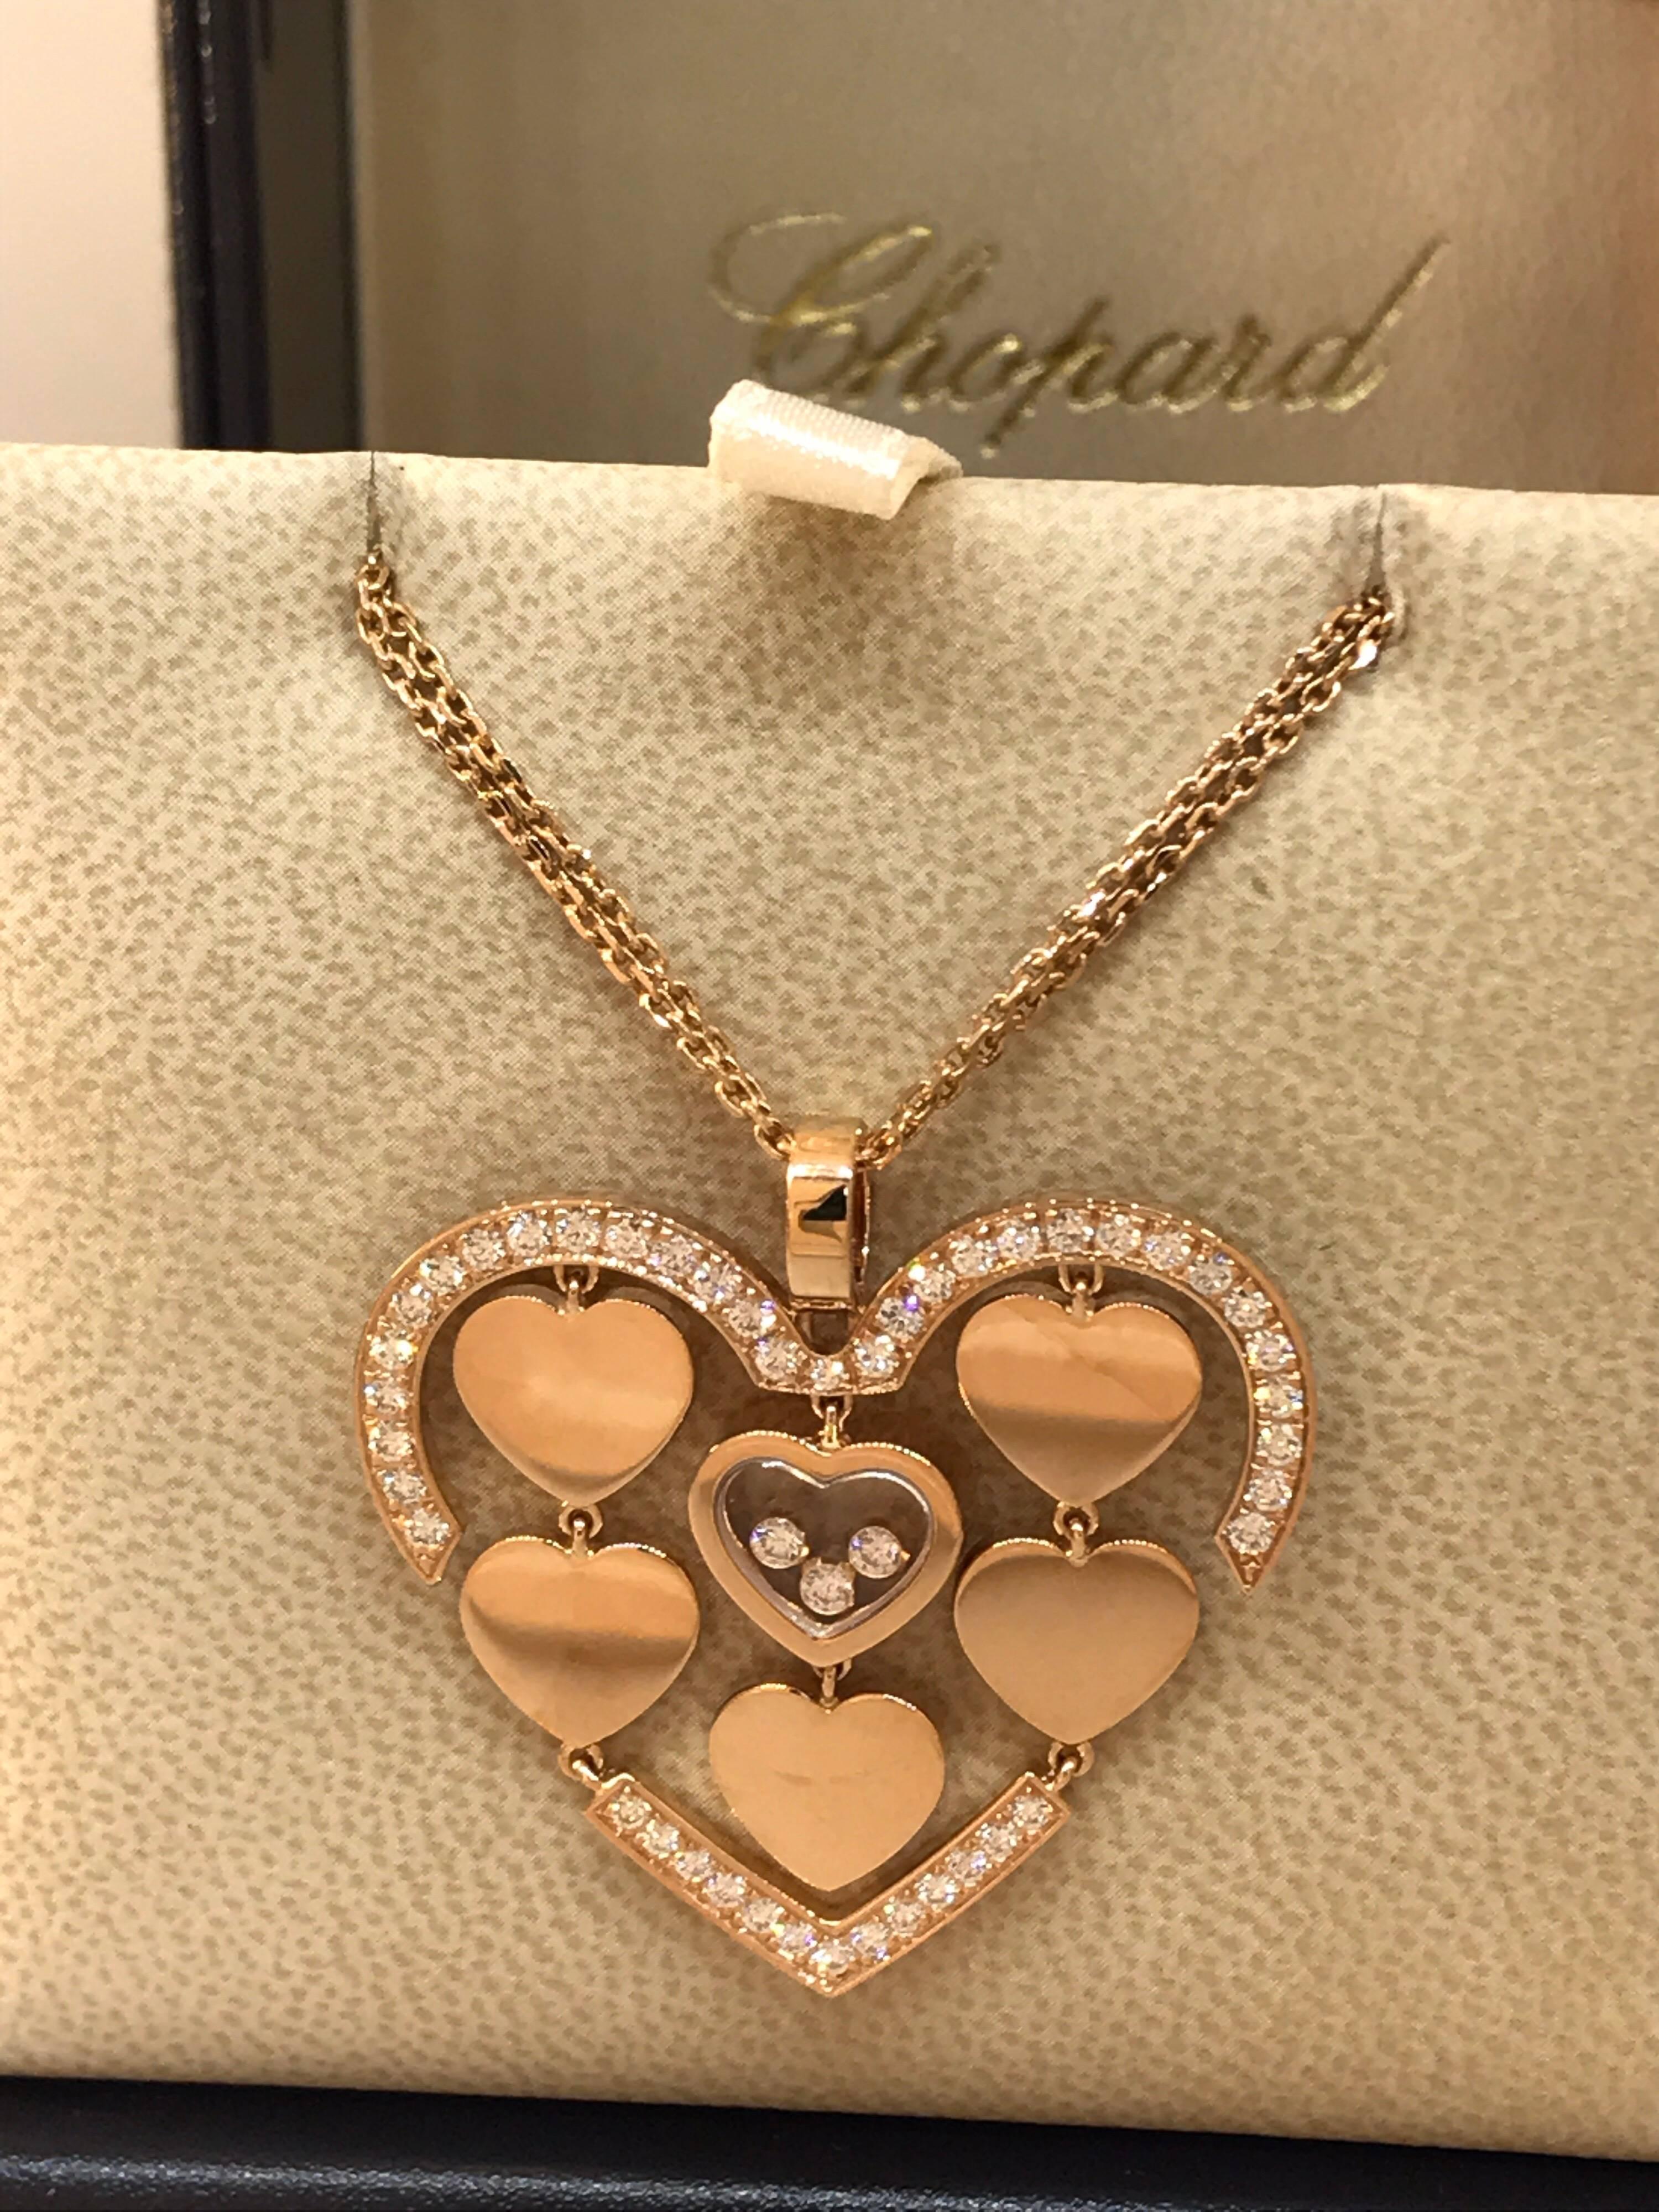 Women's Chopard Amore Hearts 18 Karat Rose Gold and Diamonds Pendant or Necklace For Sale